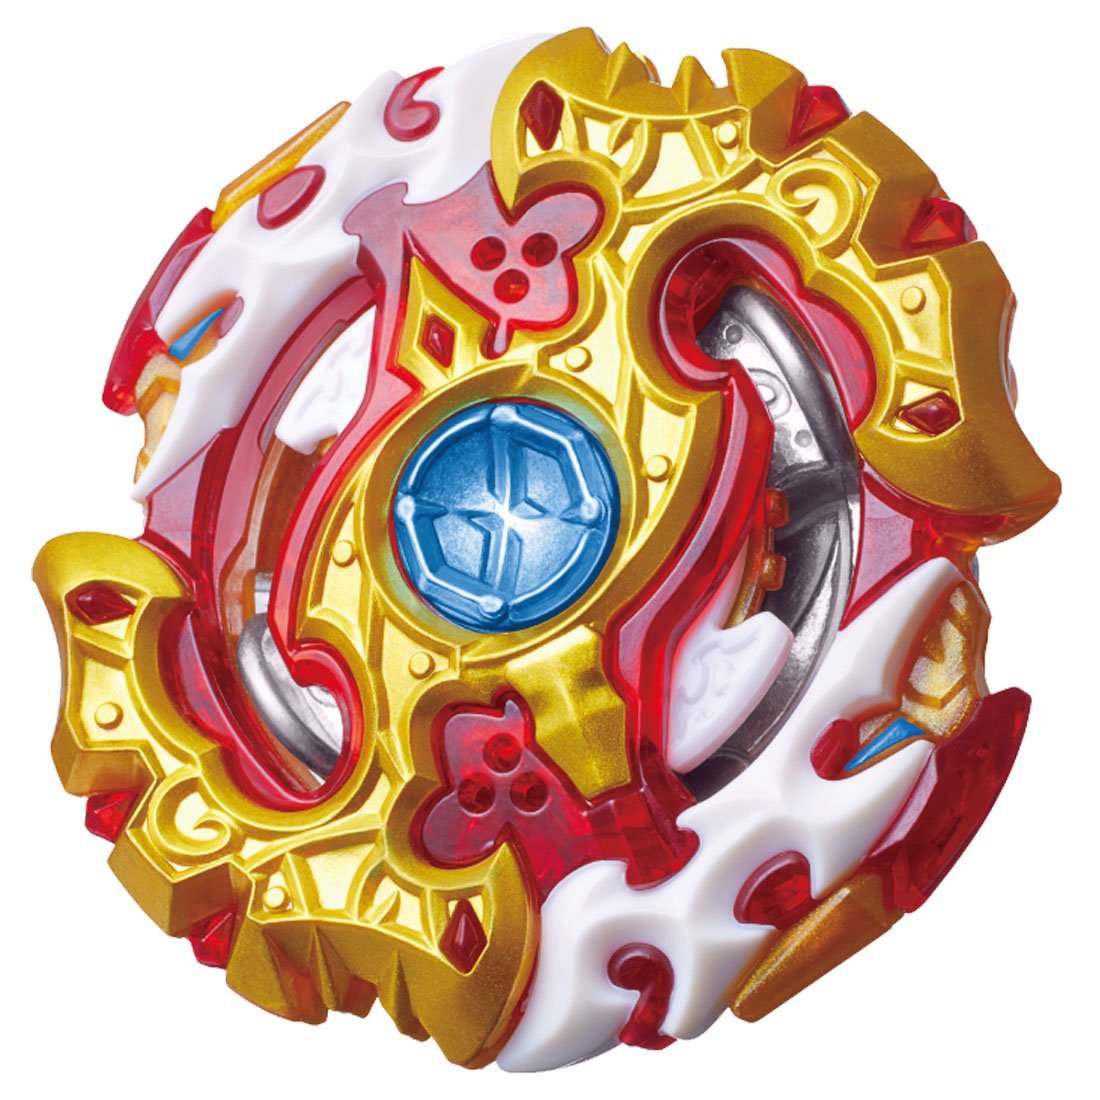 Make Your Own Beyblade Burst Character